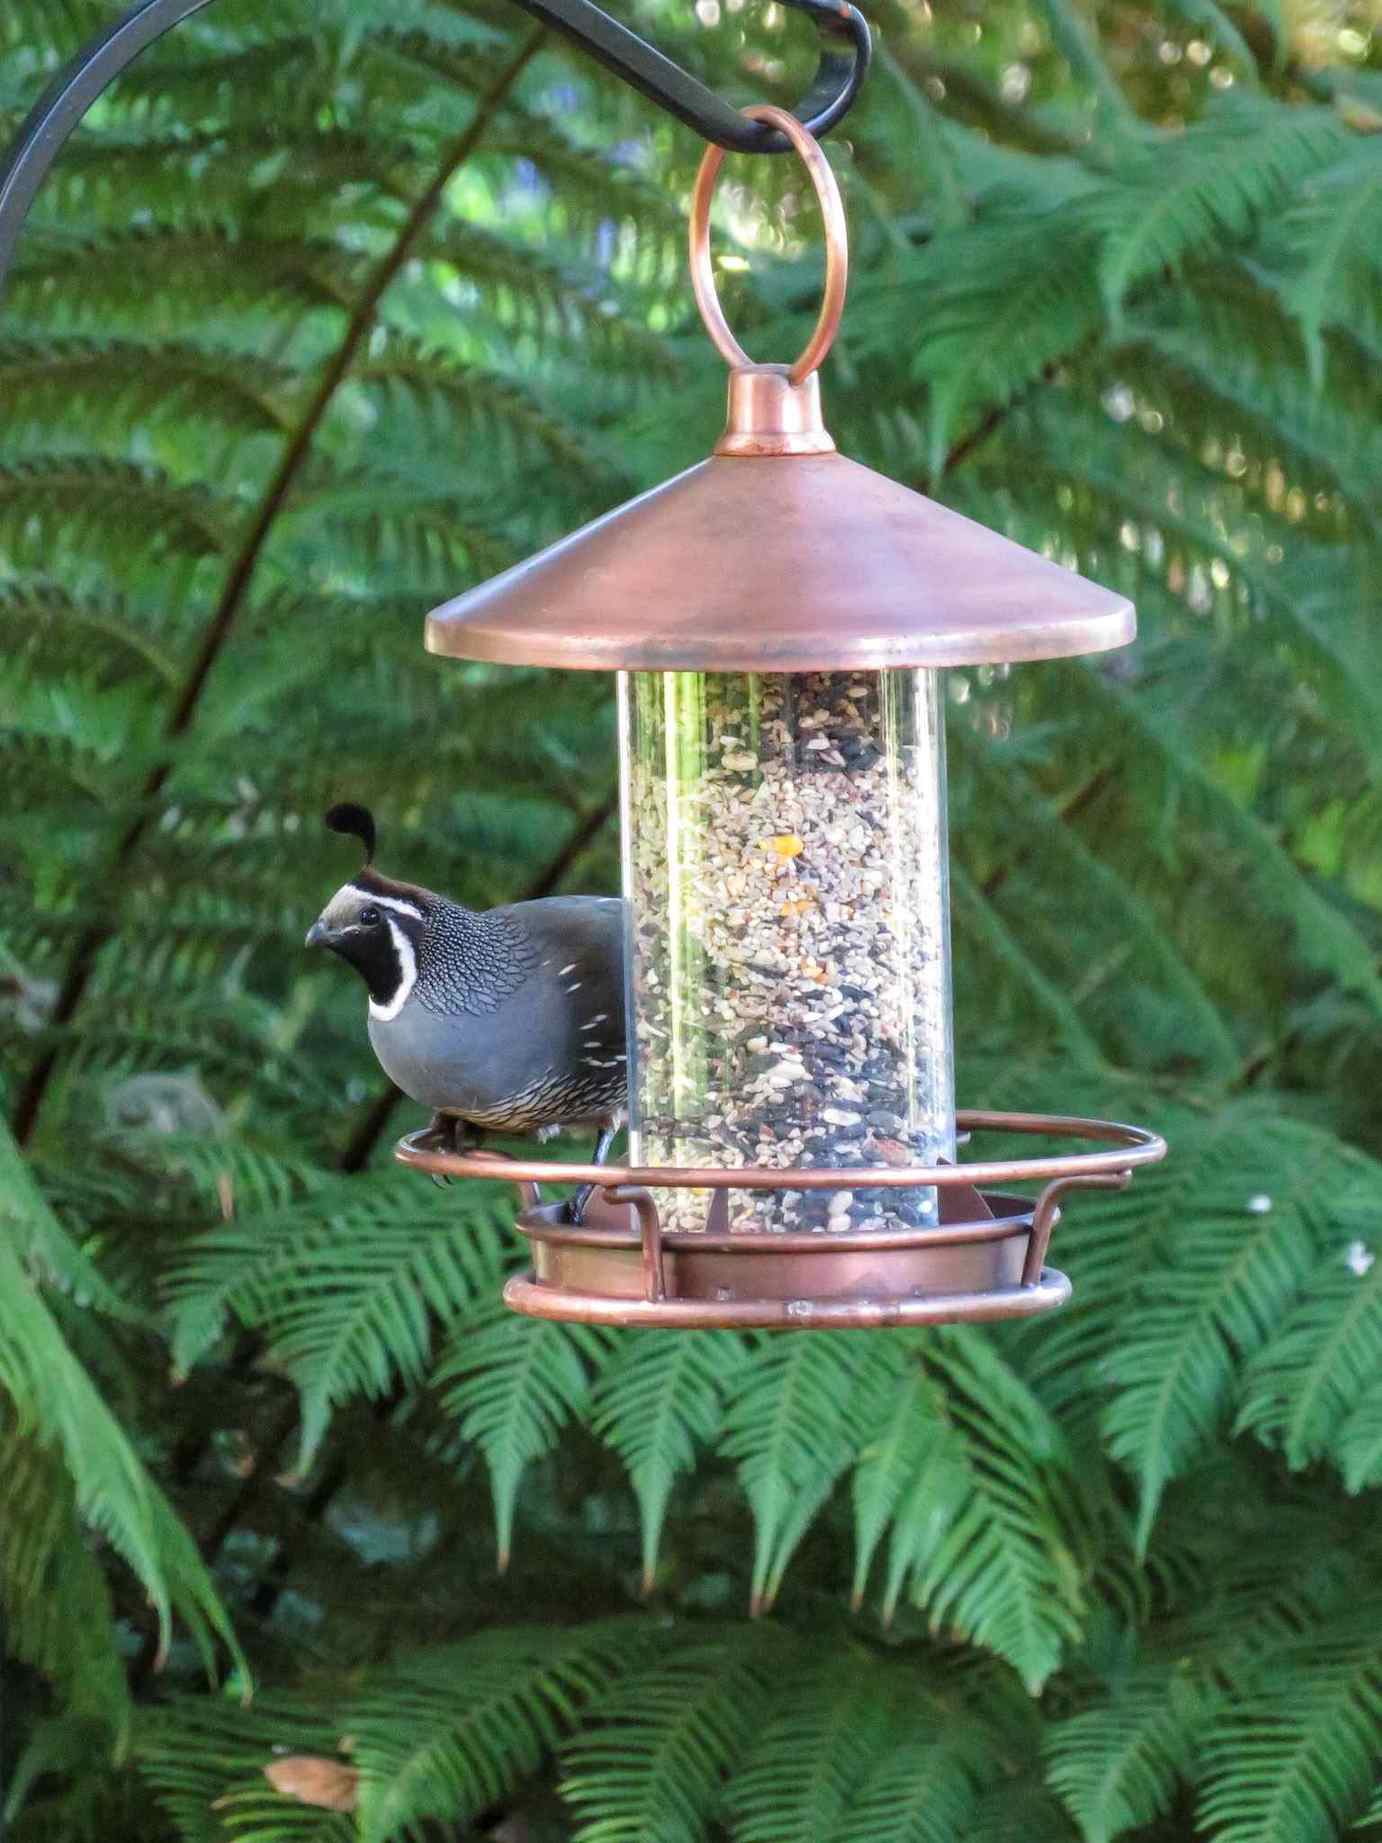 An adult male quail is perched on a hanging bird feeder as he eats his fill of seeds. Beyond is a screen of green ferns growing.